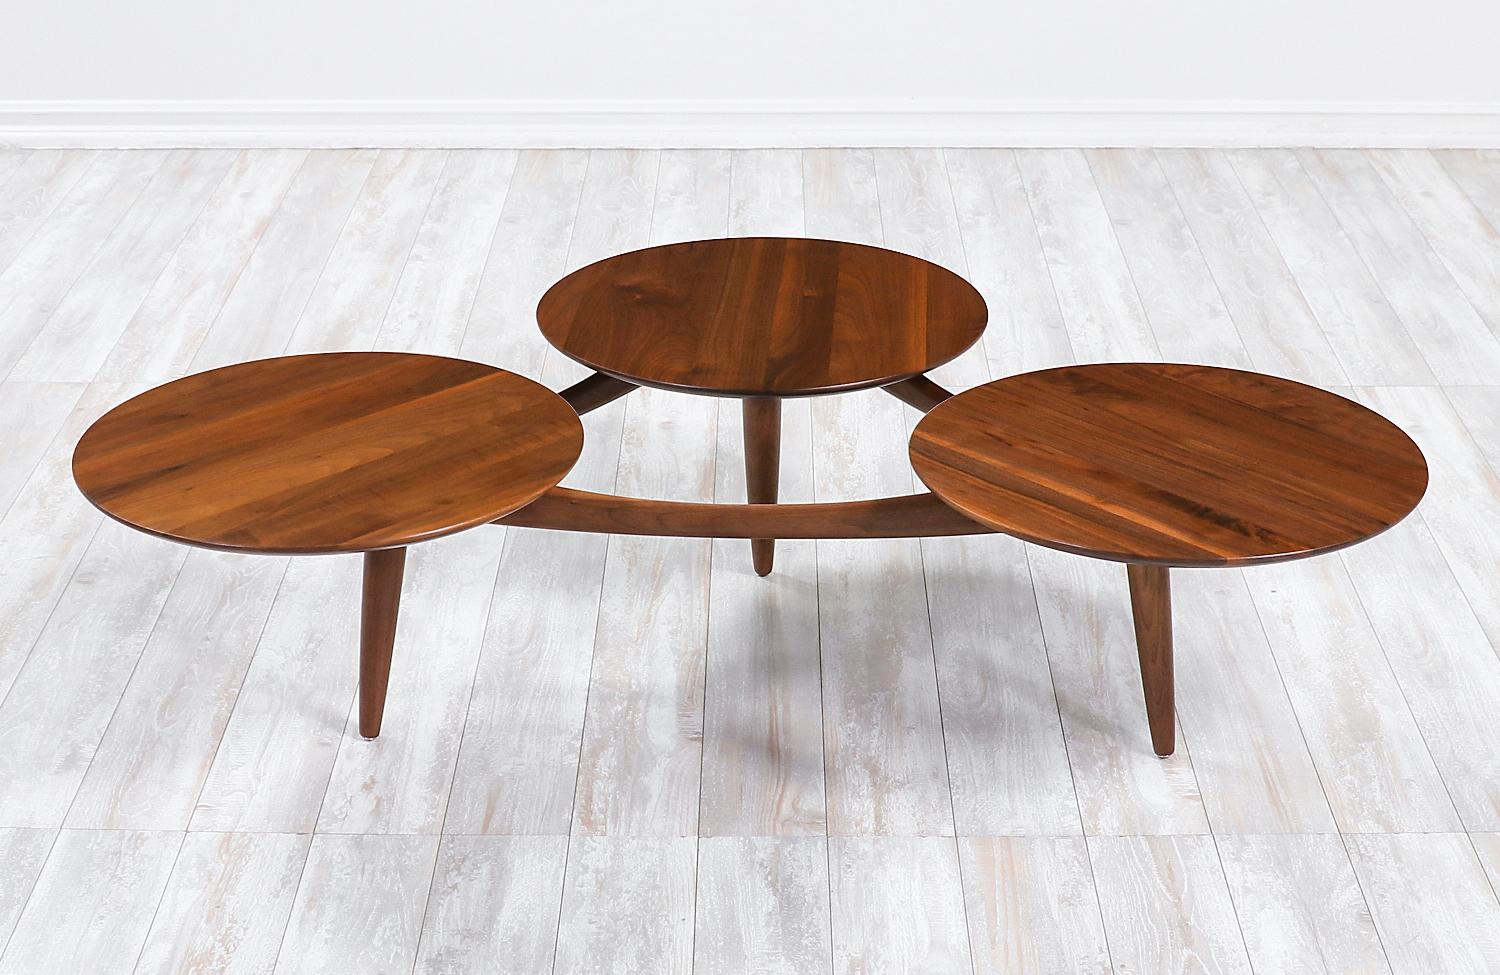 American Mid-Century Modern Sculpted Floating-Top Coffee Table by ACE-HI